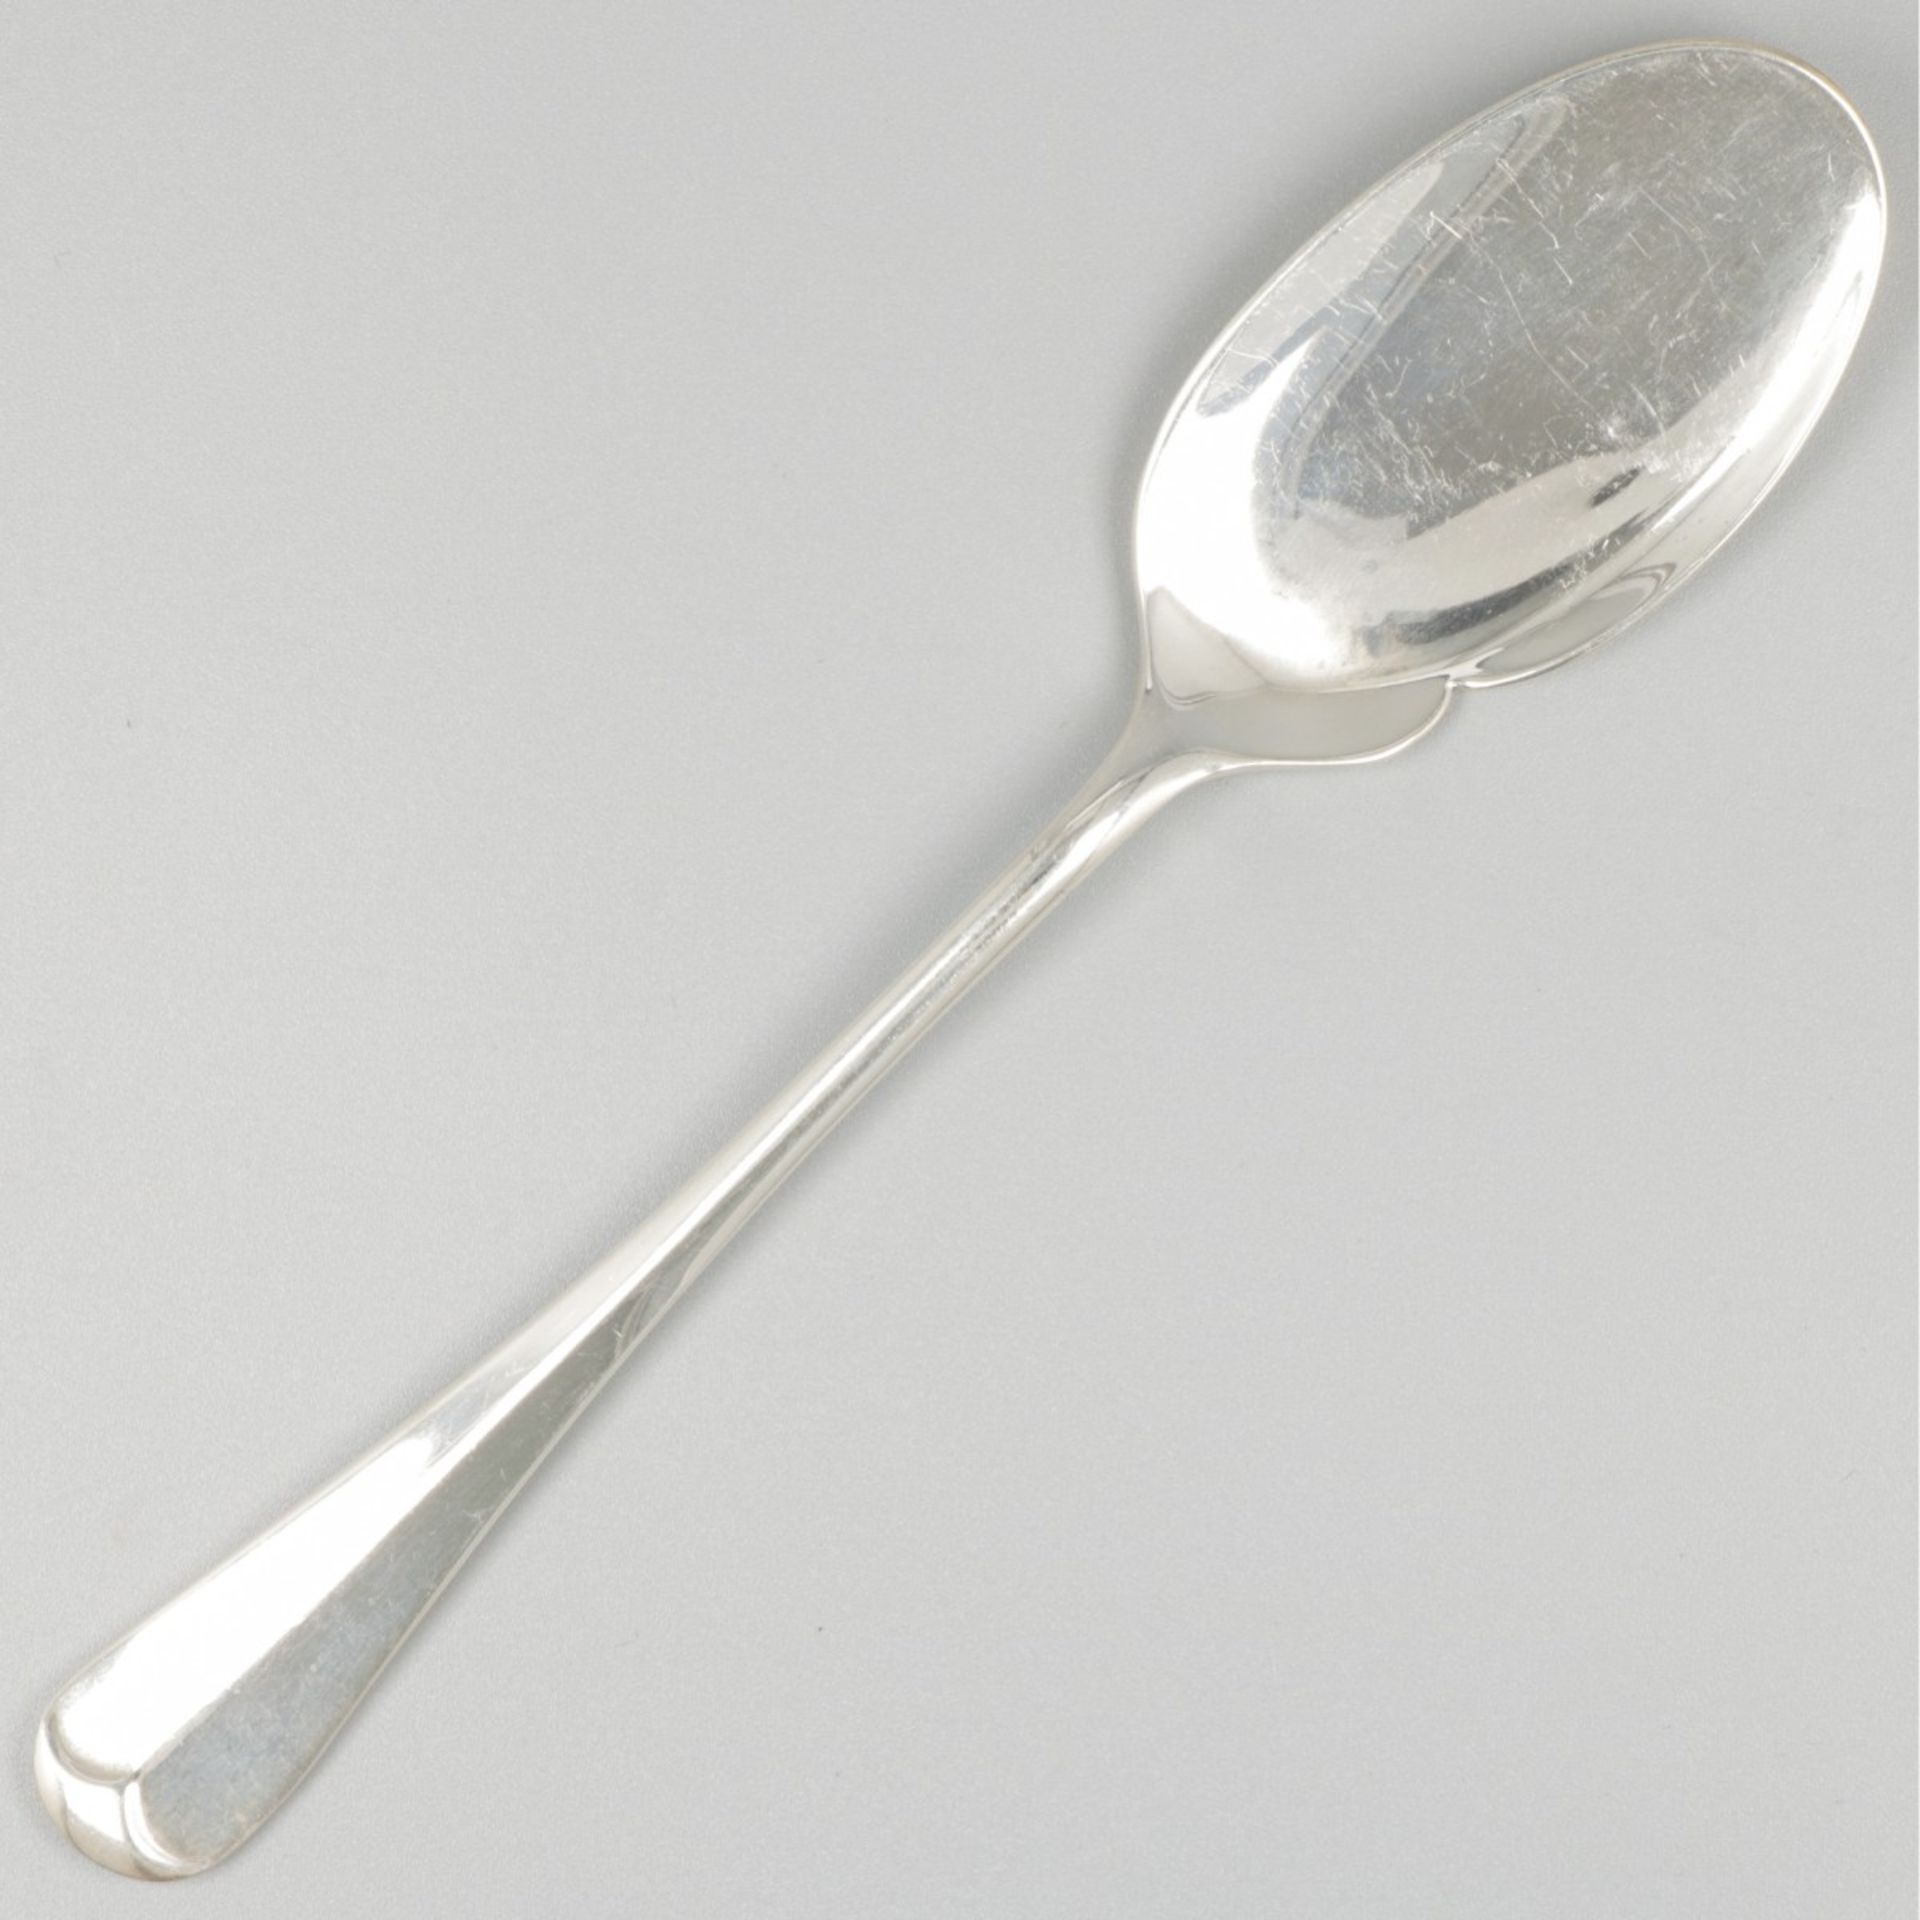 8-piece set of ice cream scoops silver. - Image 4 of 7